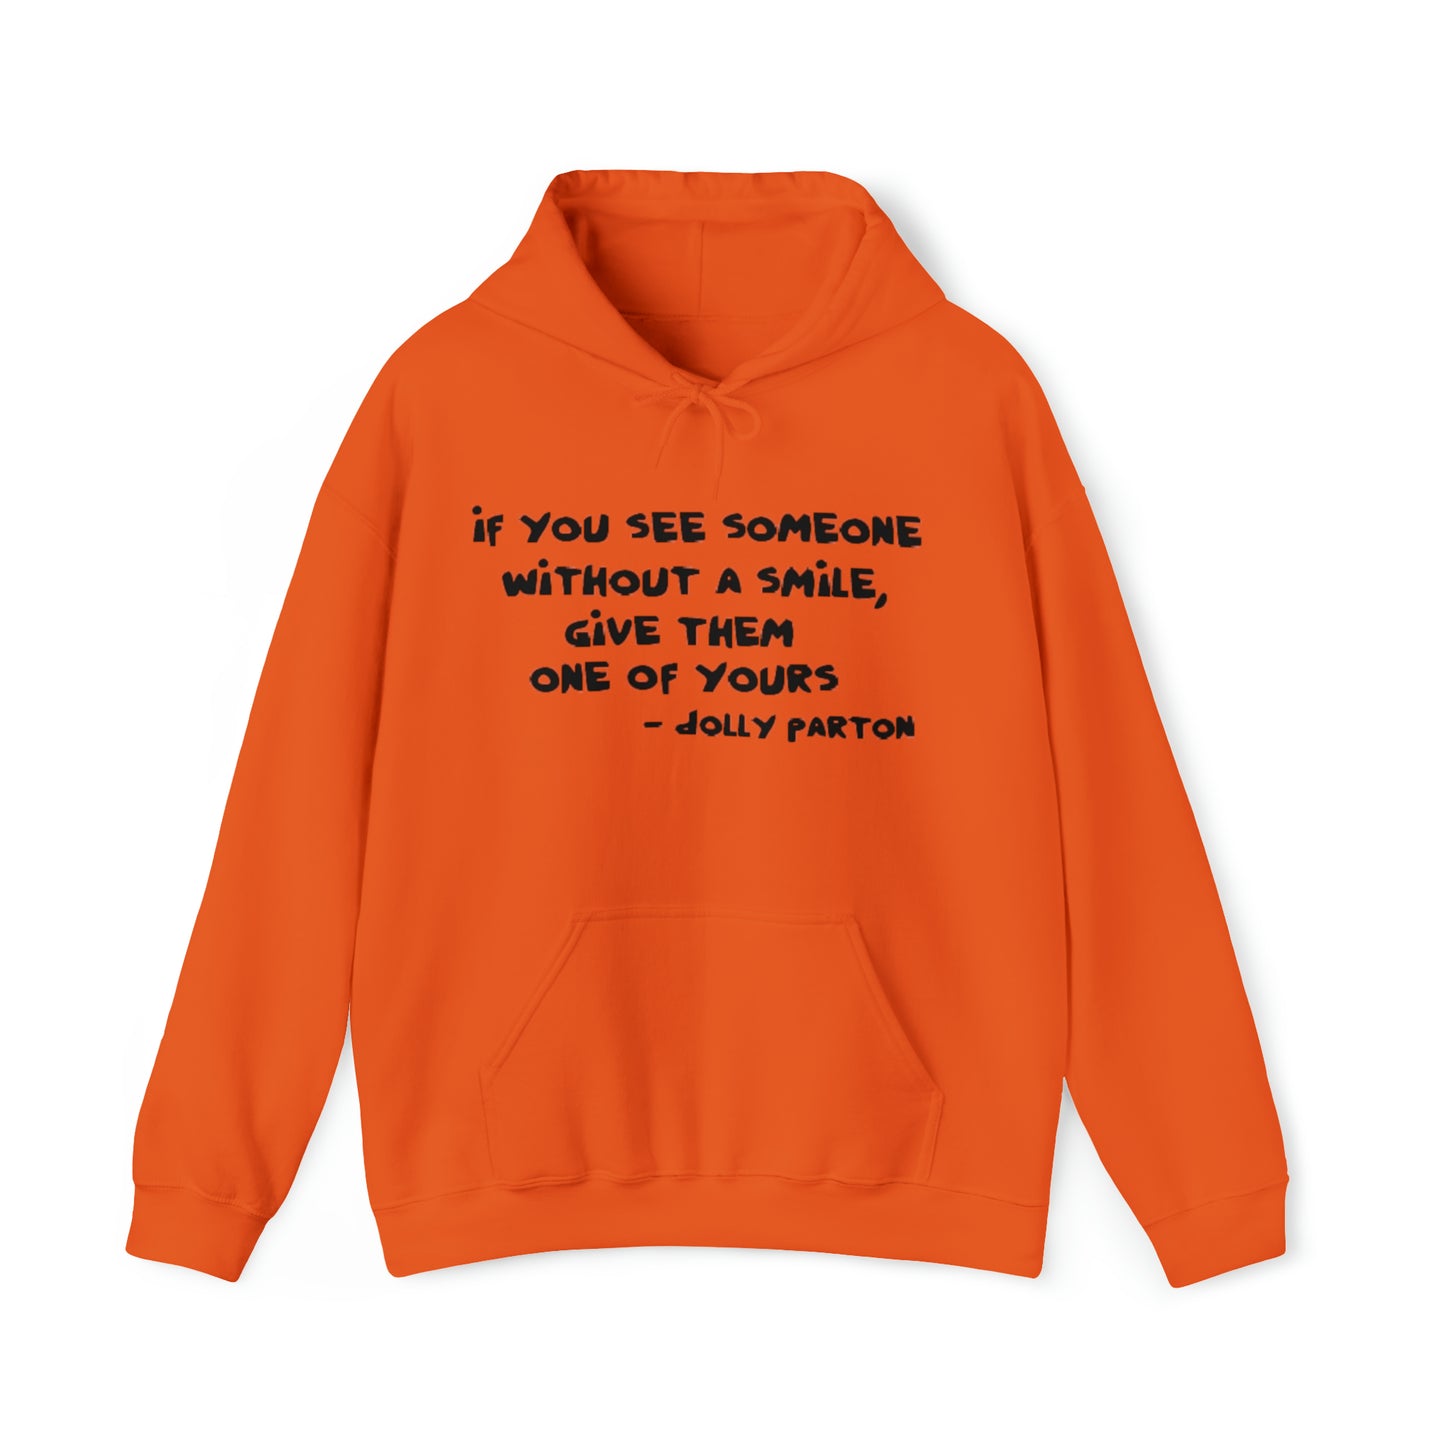 Give Them One of Yours - Unisex Heavy Blend™ Hooded Sweatshirt